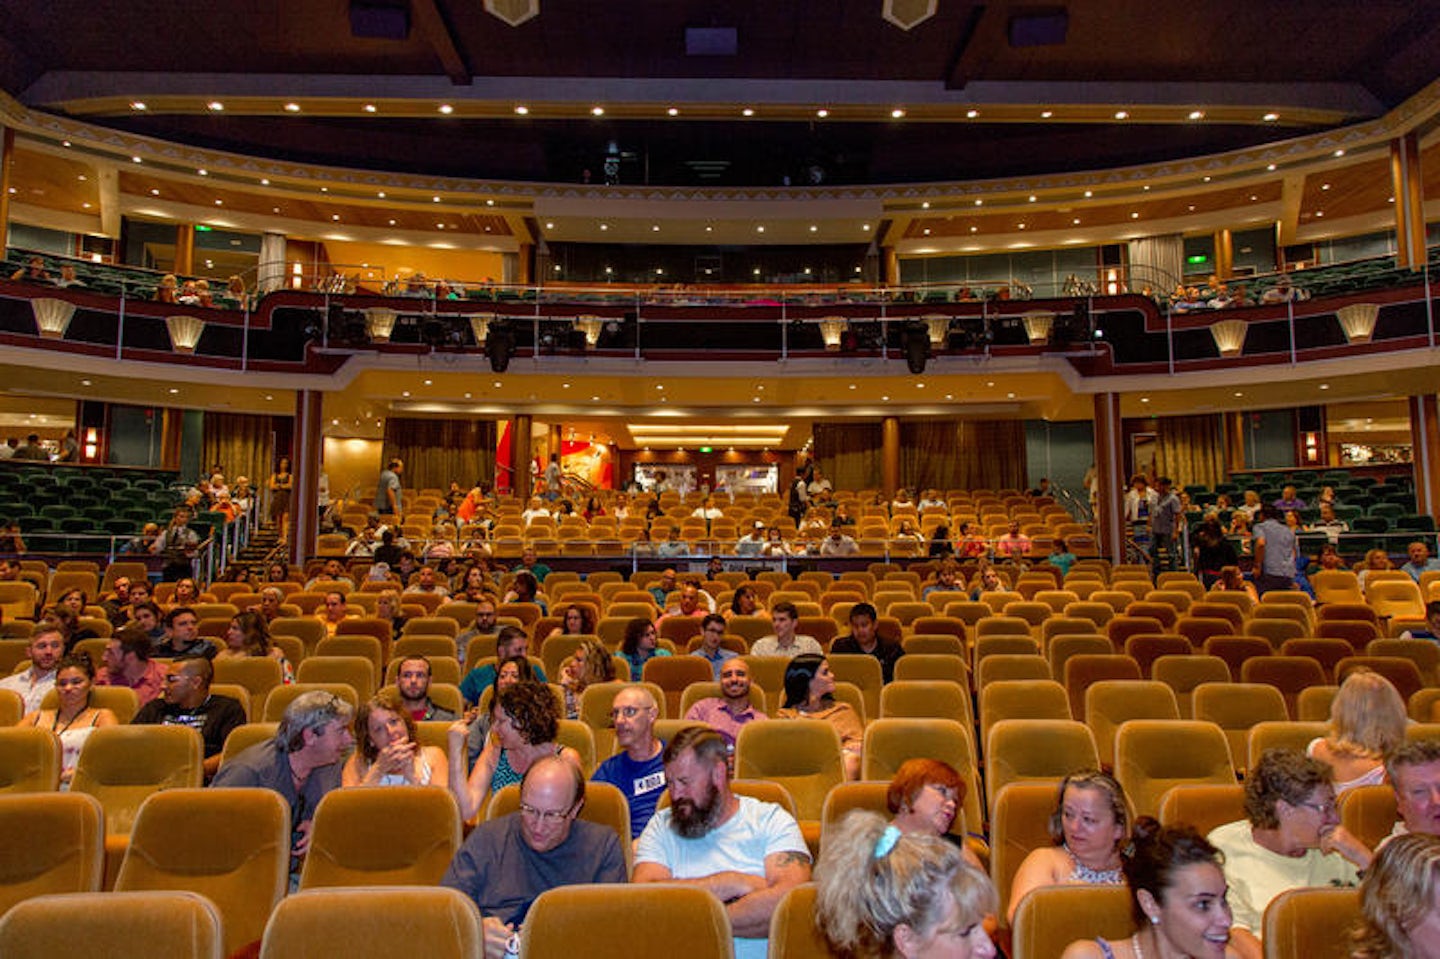 Royal Theater on Mariner of the Seas